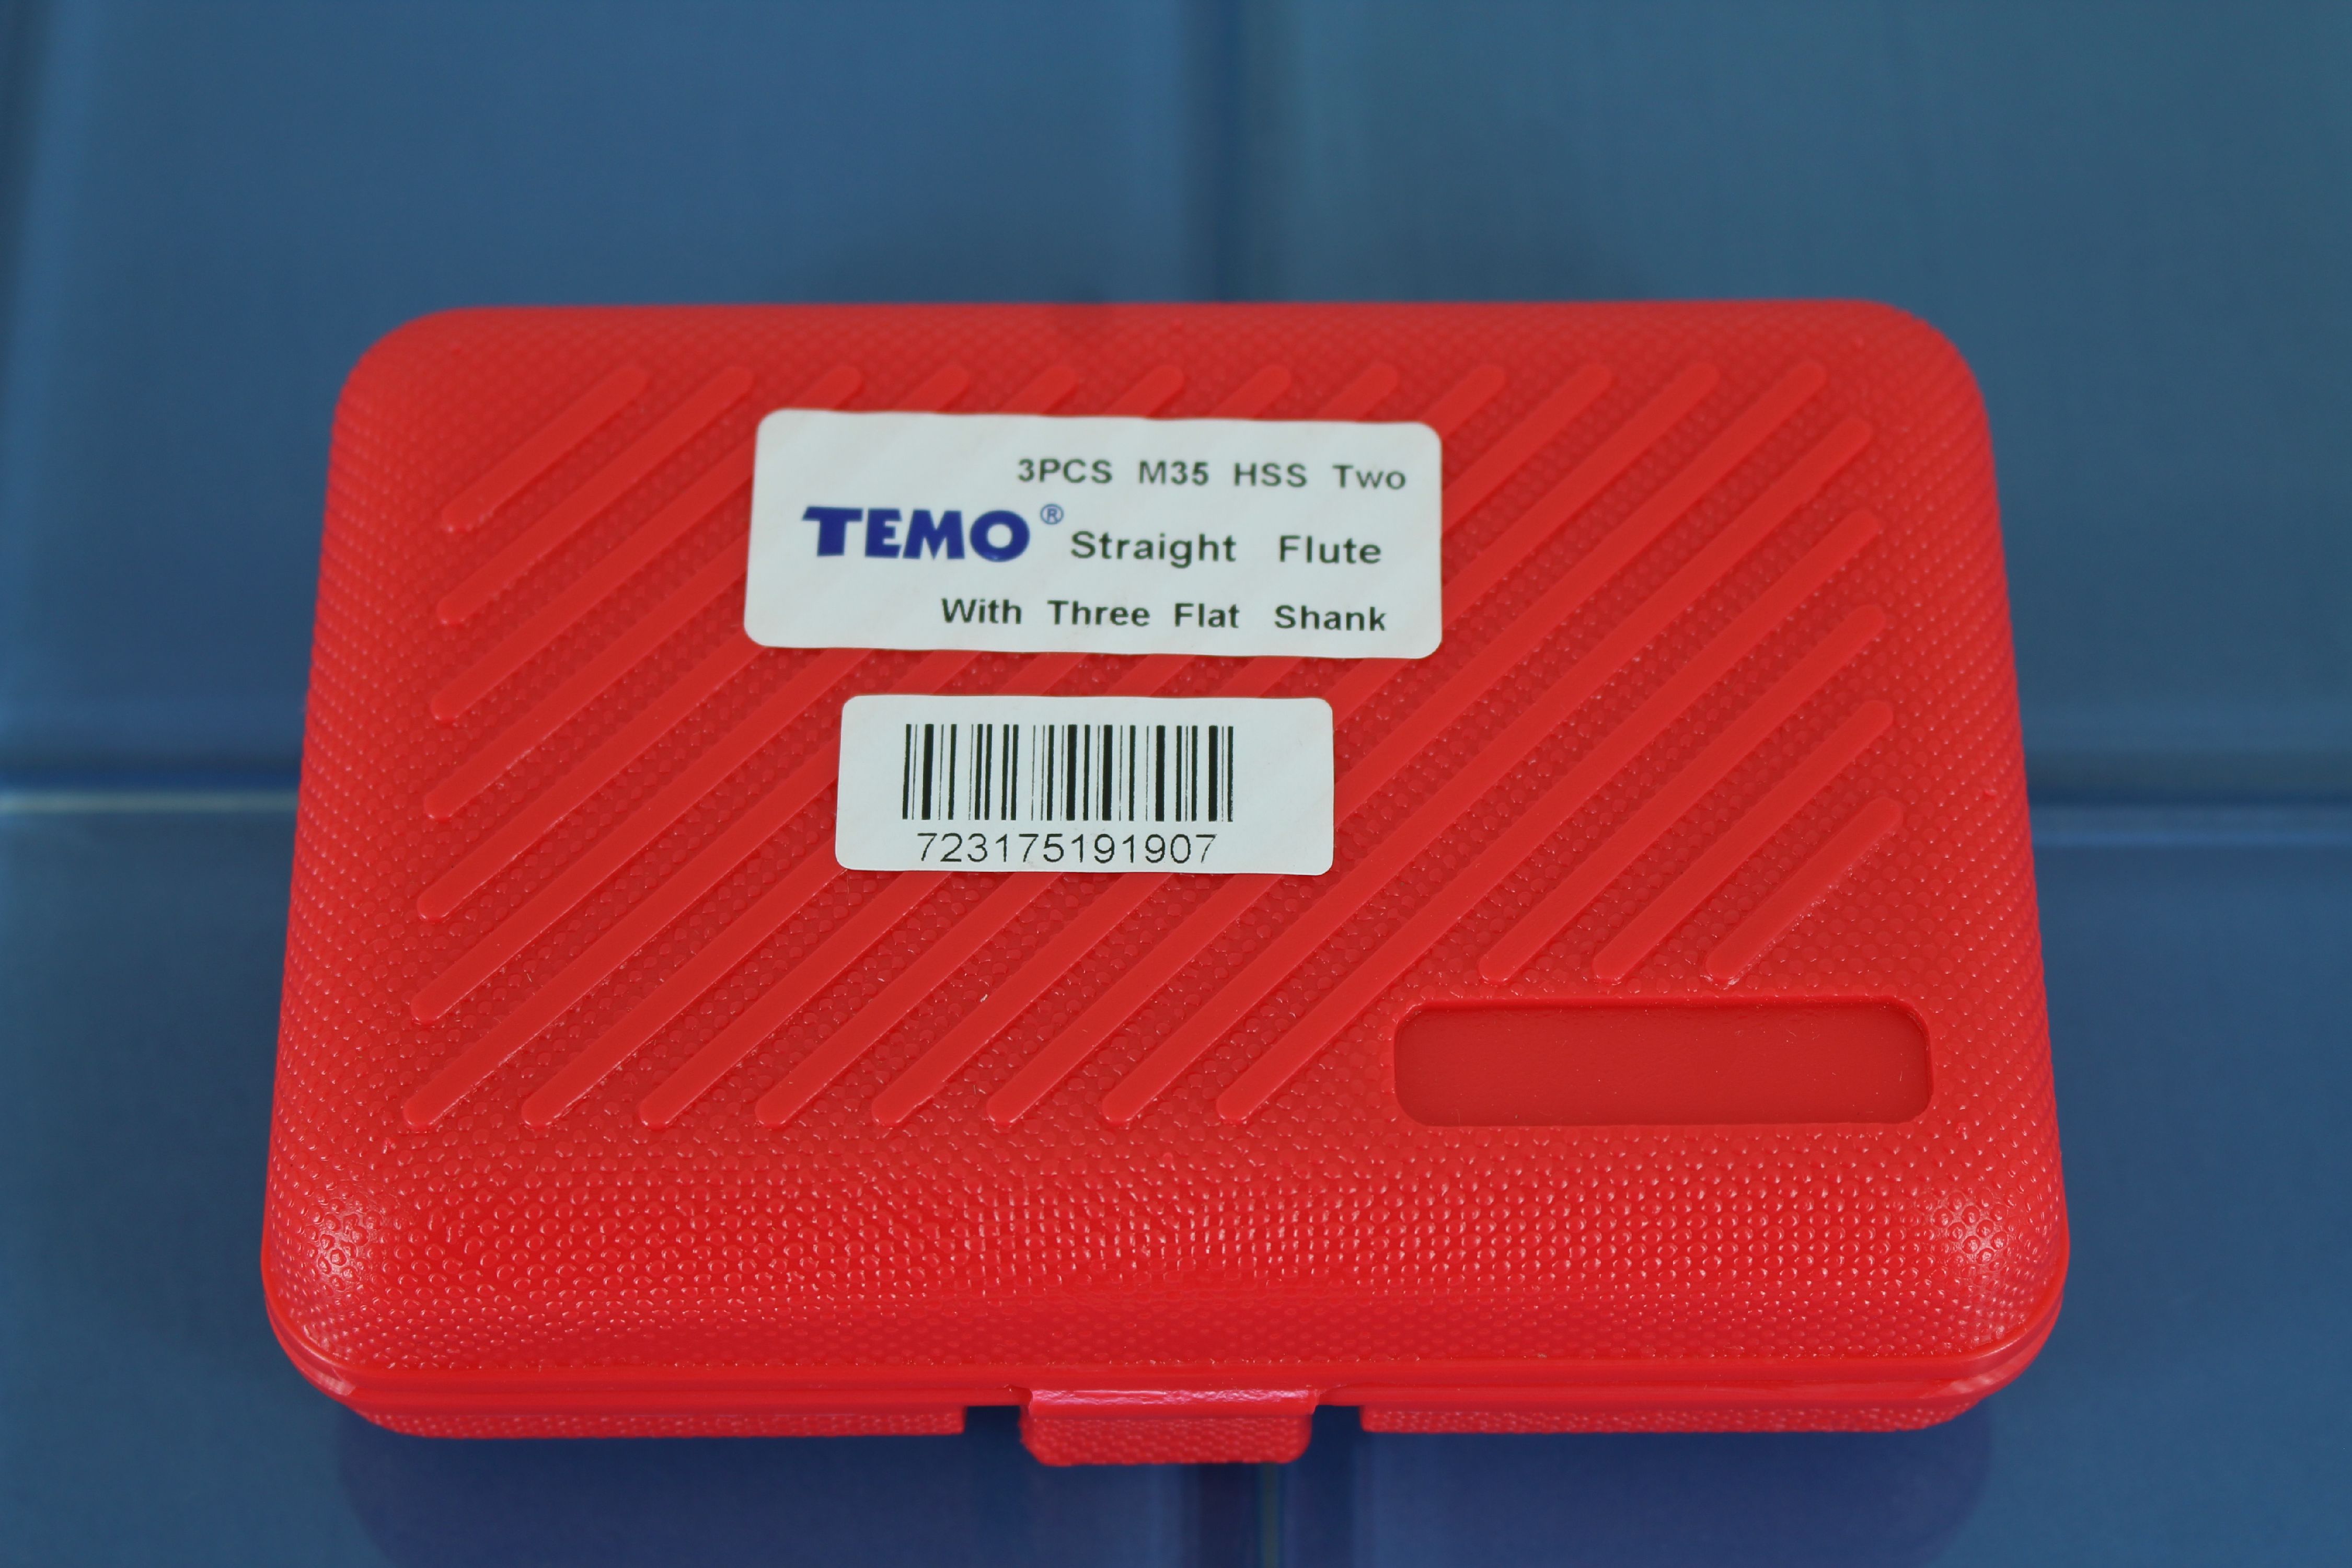 TEMO 3pc M35 Cobalt HSS Step Drill Set Two Flute Total 28 Sizes (3/16"-1/2" 6 step, 1/4"-3/4" 9 step, 1/8"-1/2" 13 step) - image 2 of 3